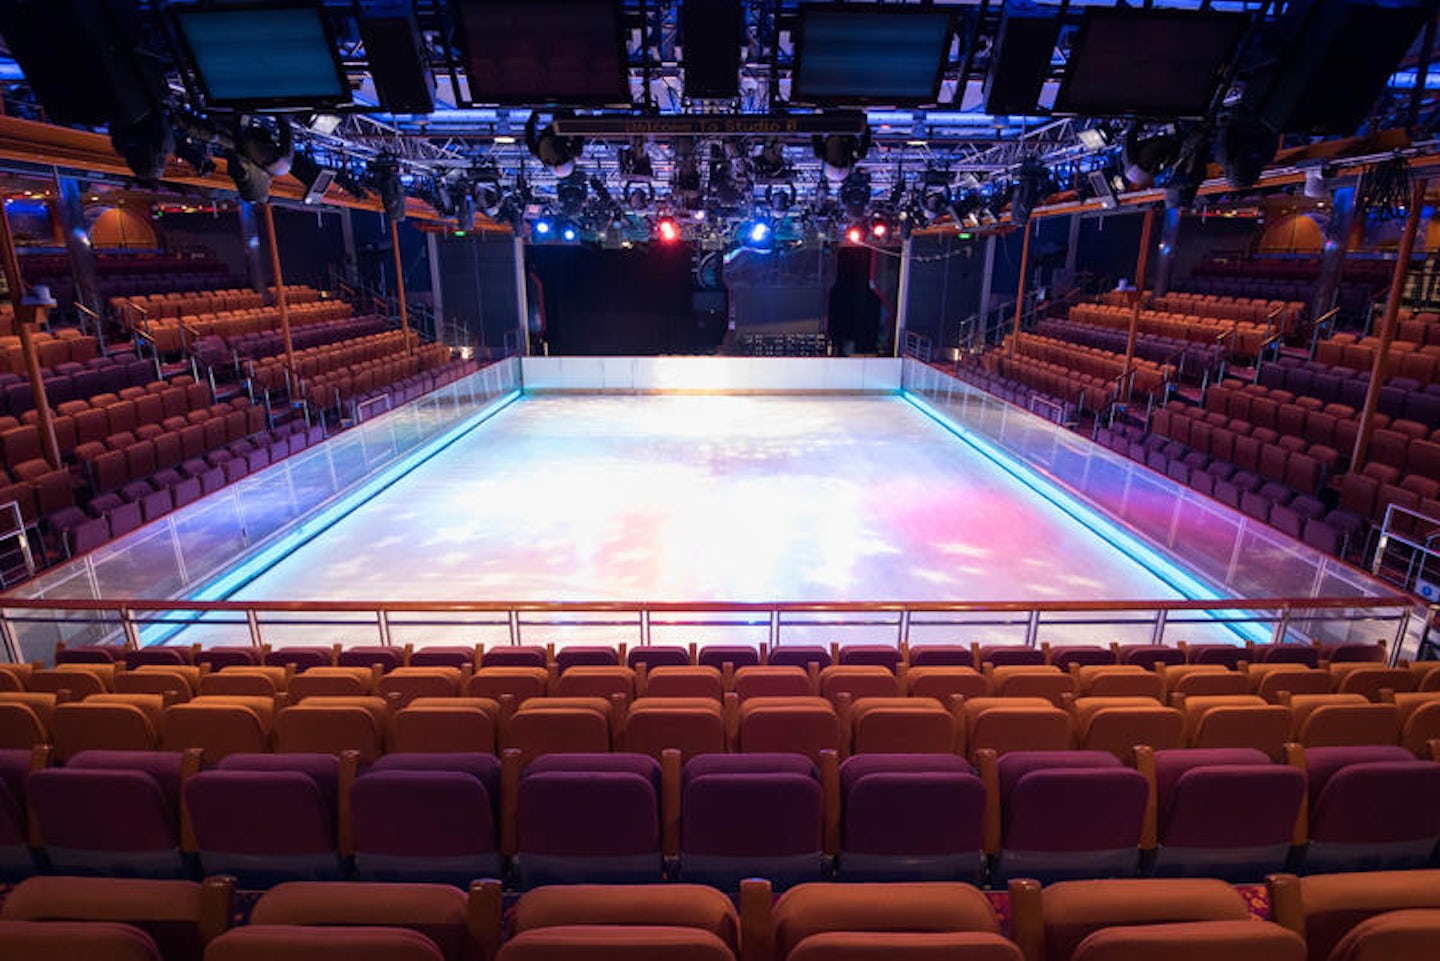 Ice Skating Rink on Freedom of the Seas